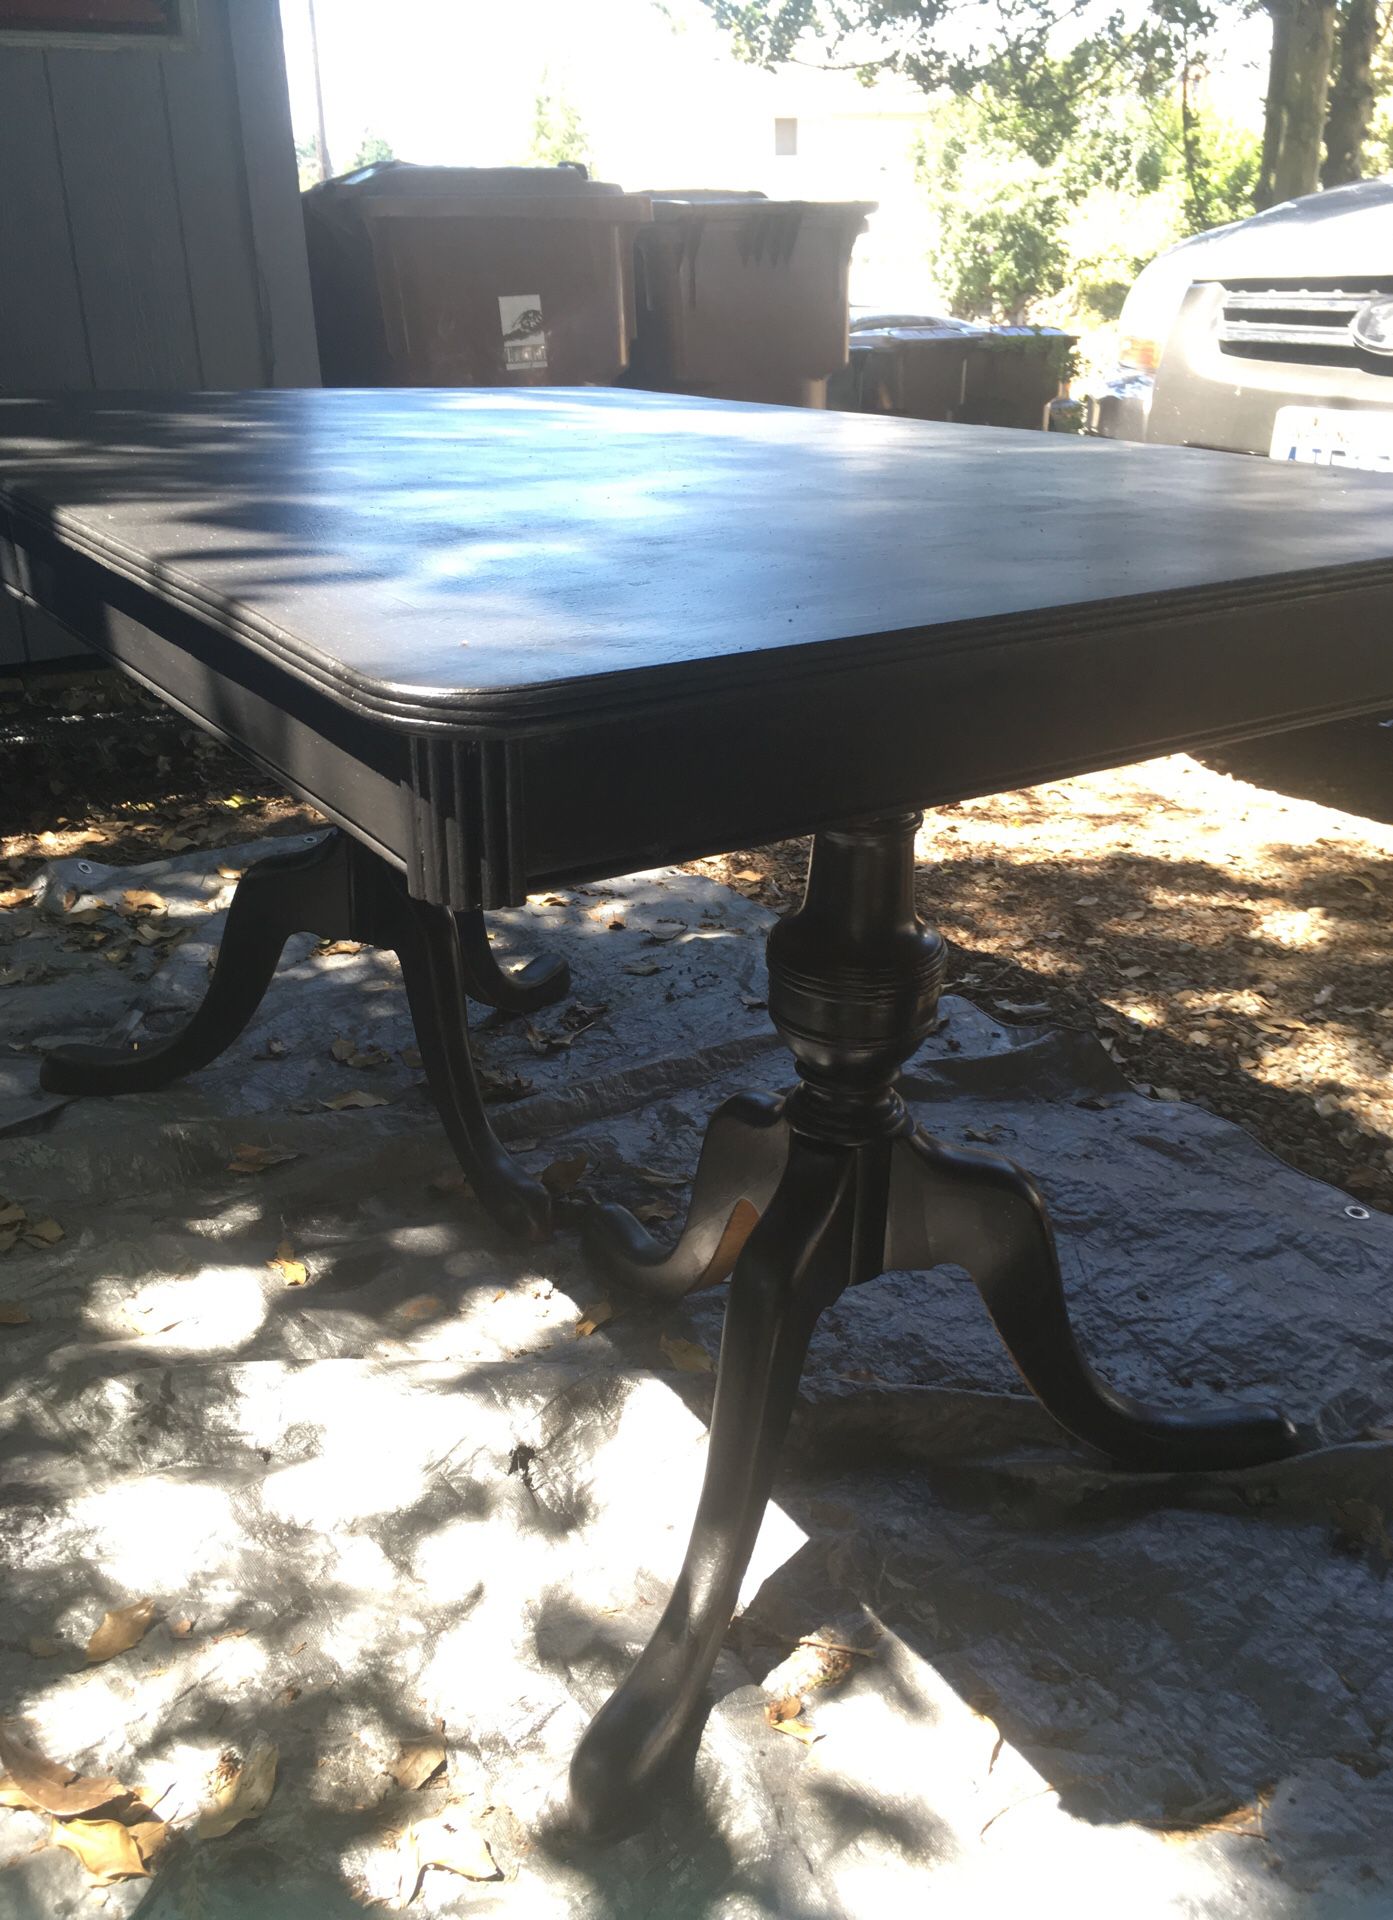 Beautiful black two pedestal all wooden table...